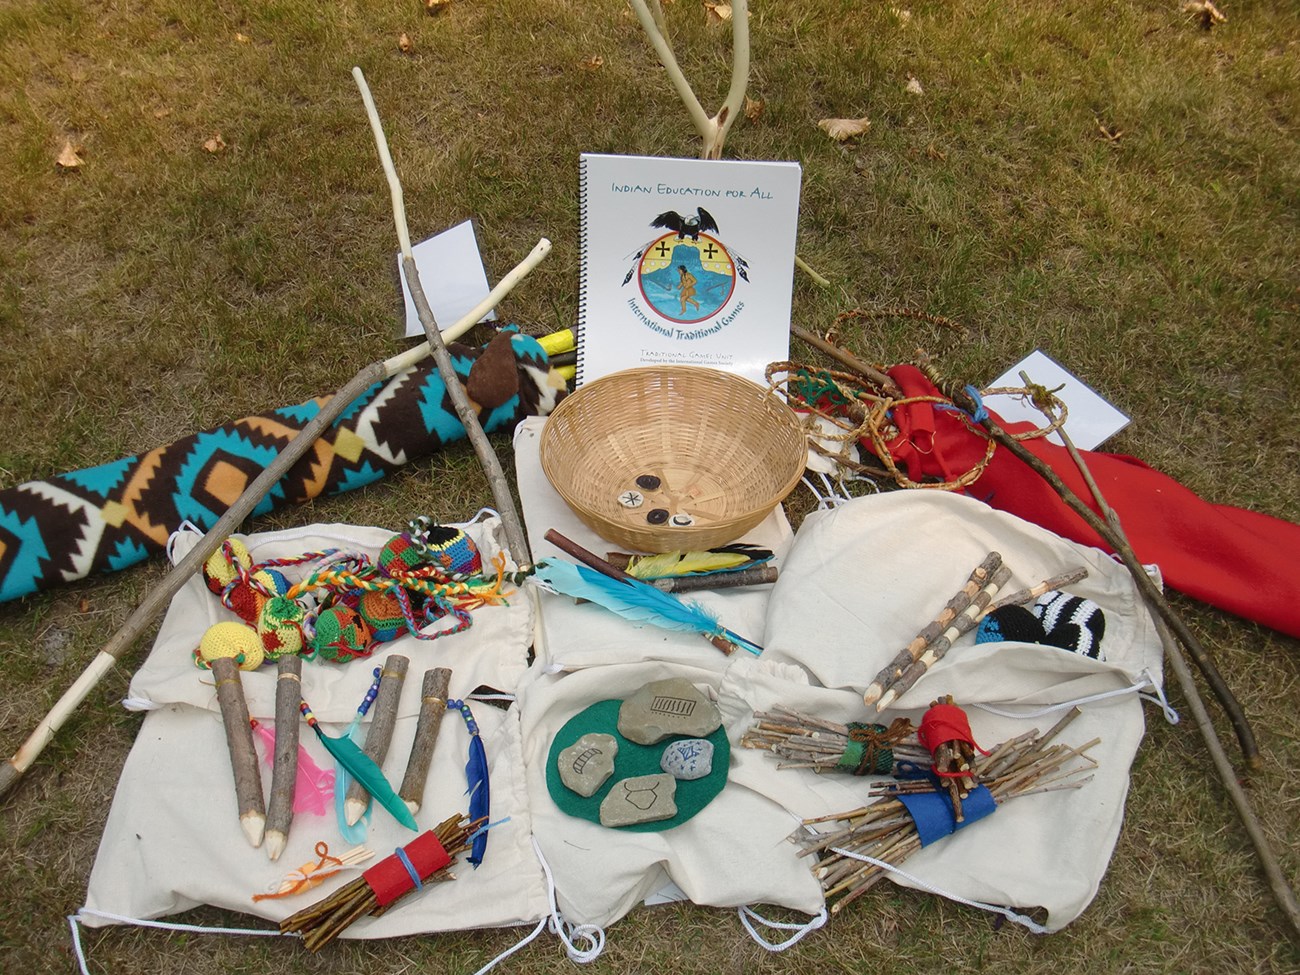 basket, sticks, antlers, and other game pieces arranged on grass